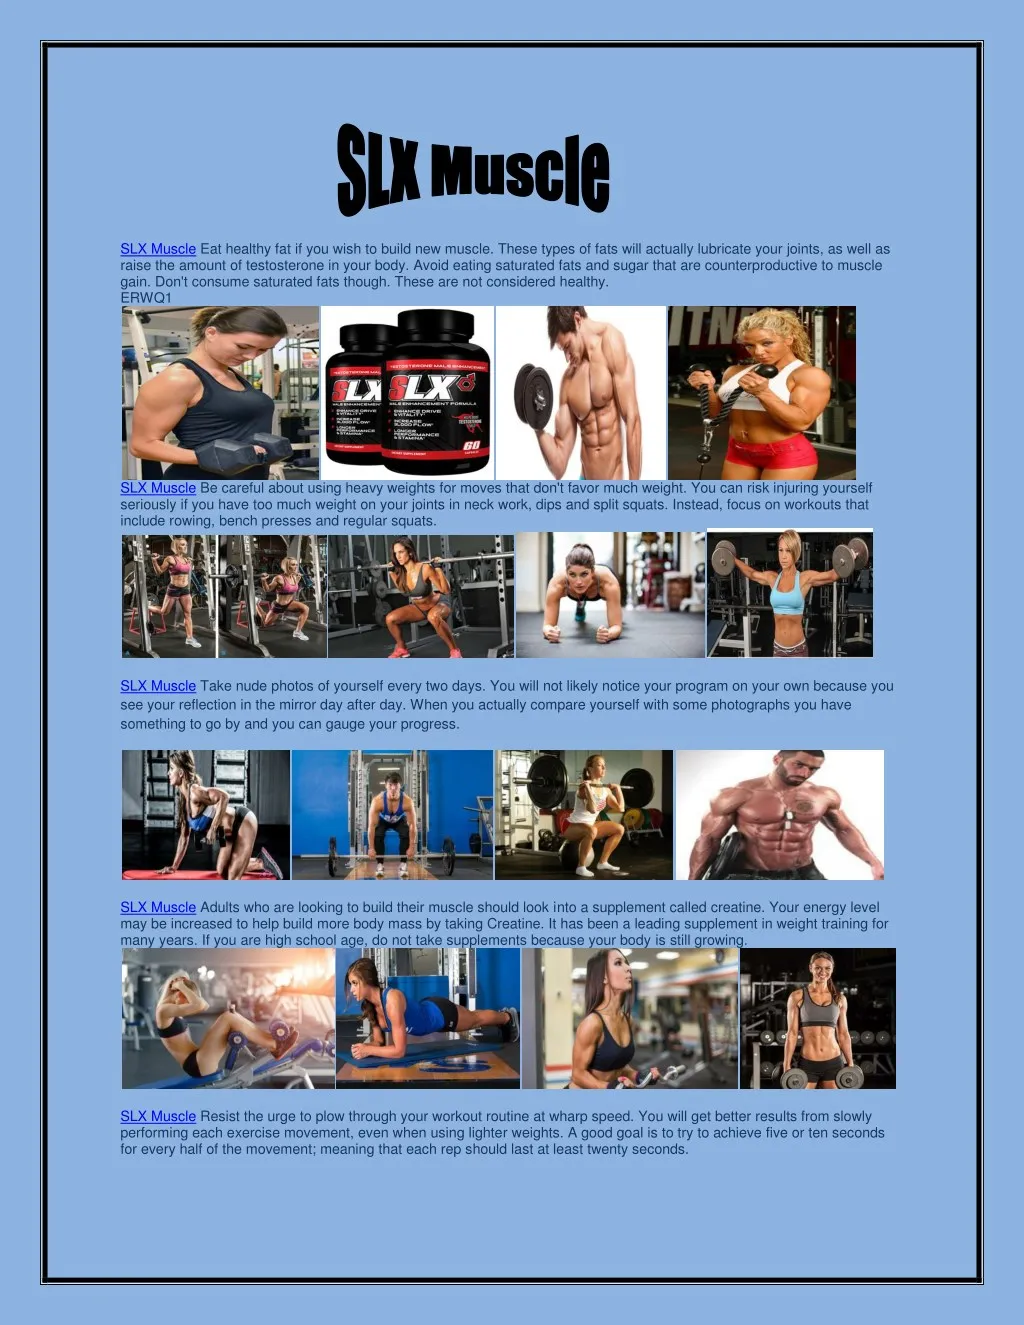 slx muscle eat healthy fat if you wish to build